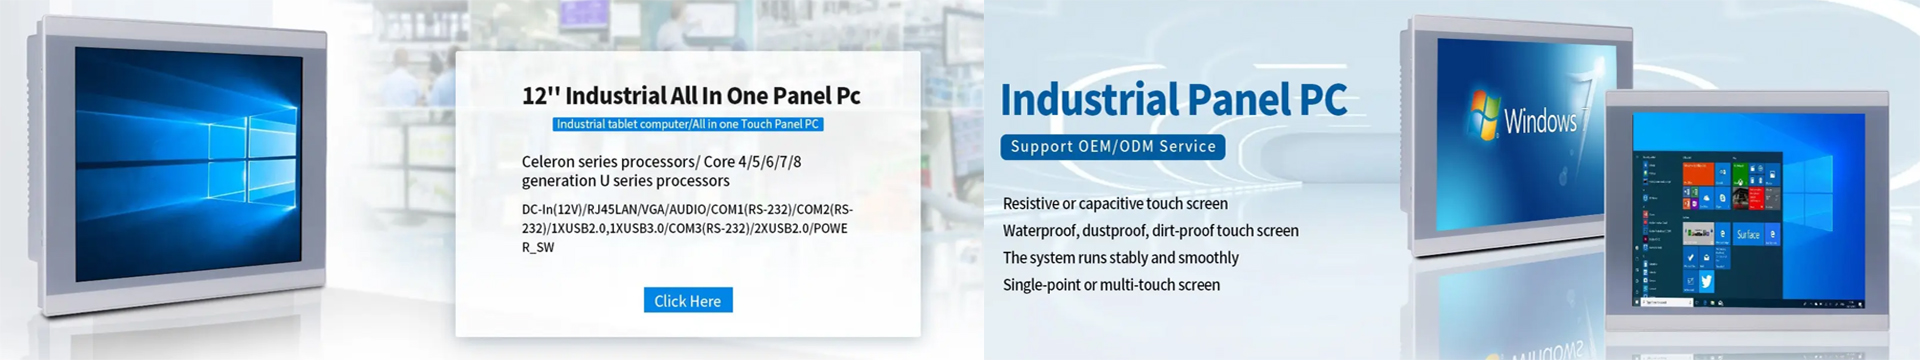 Industrial panel pc